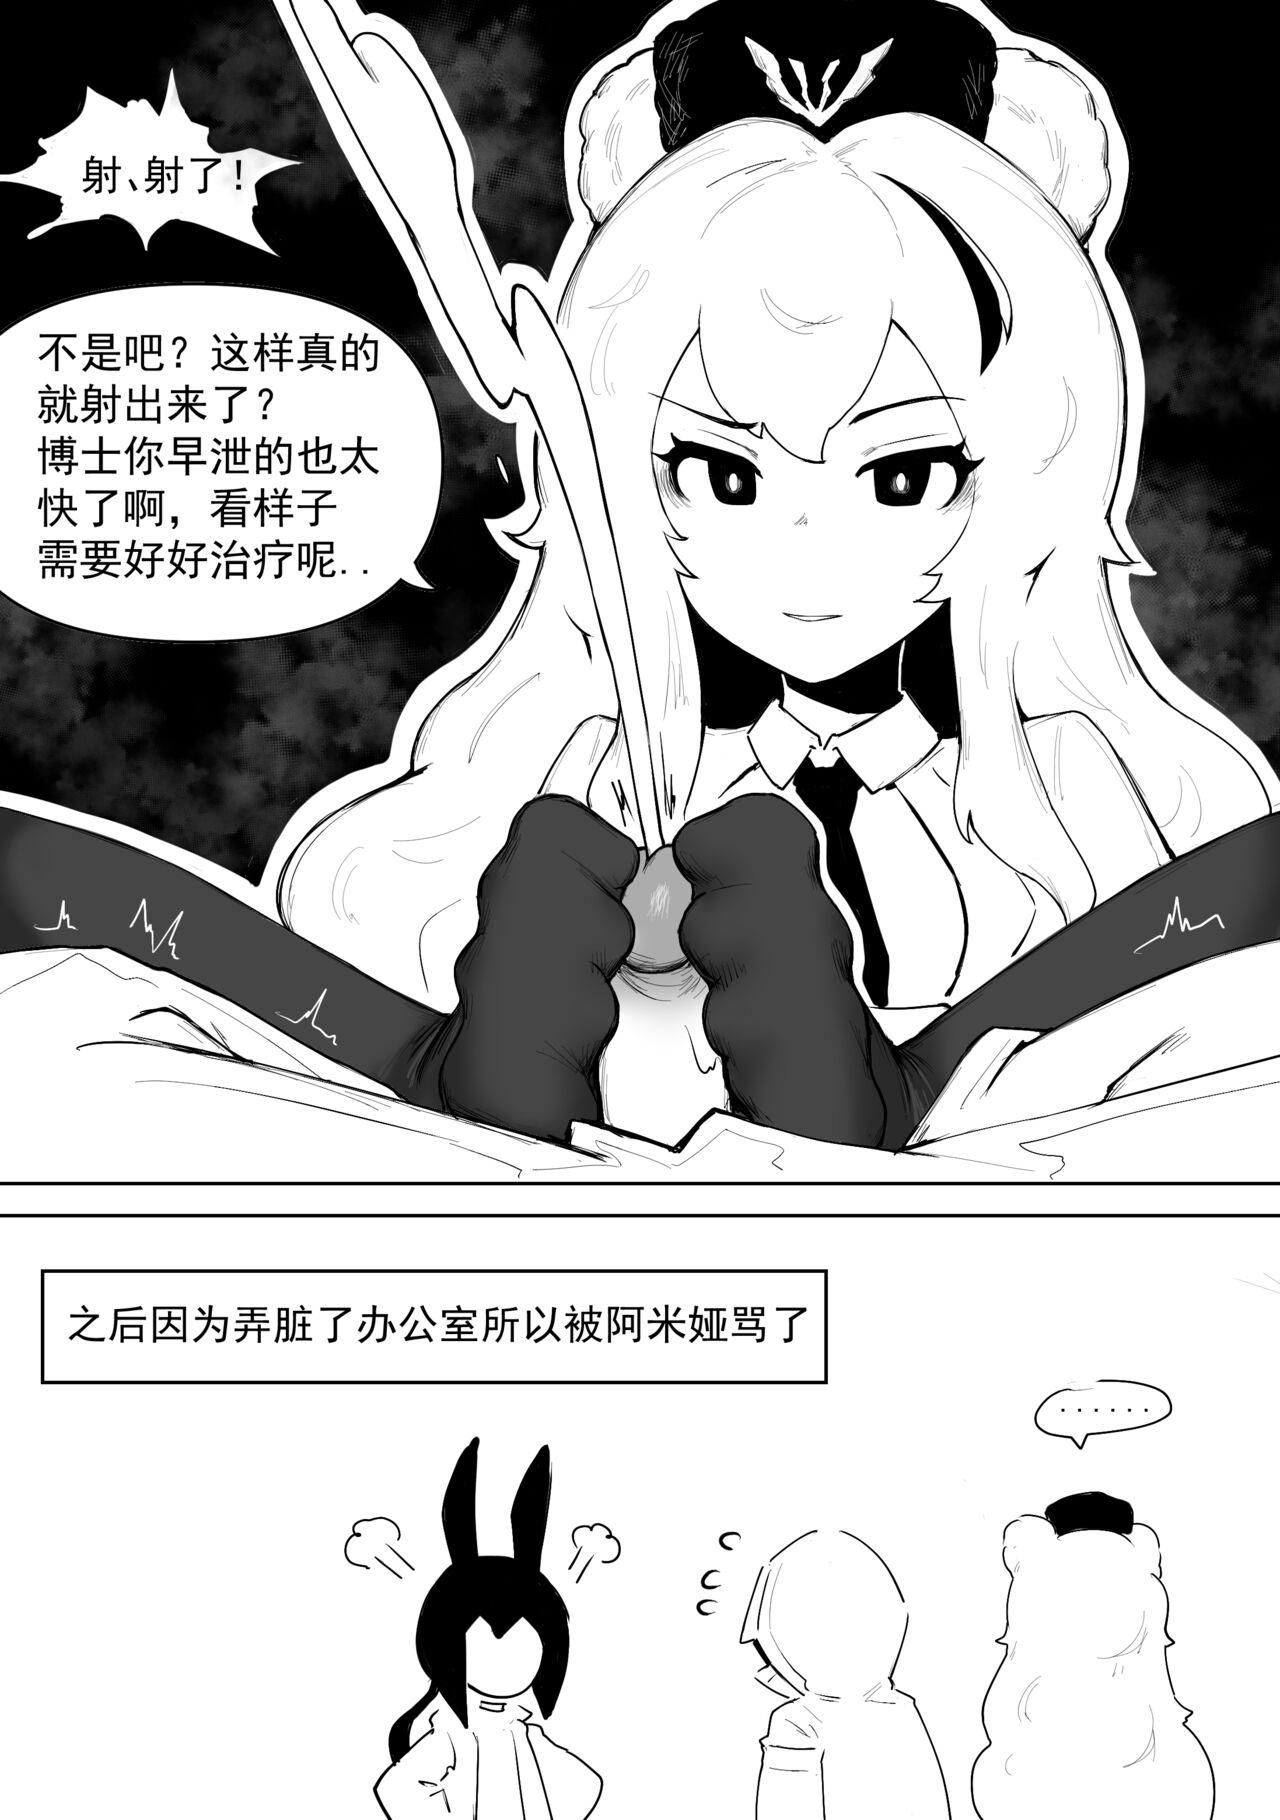 Nasty 澄澈之冰 早露 - Arknights Girlfriend - Page 6